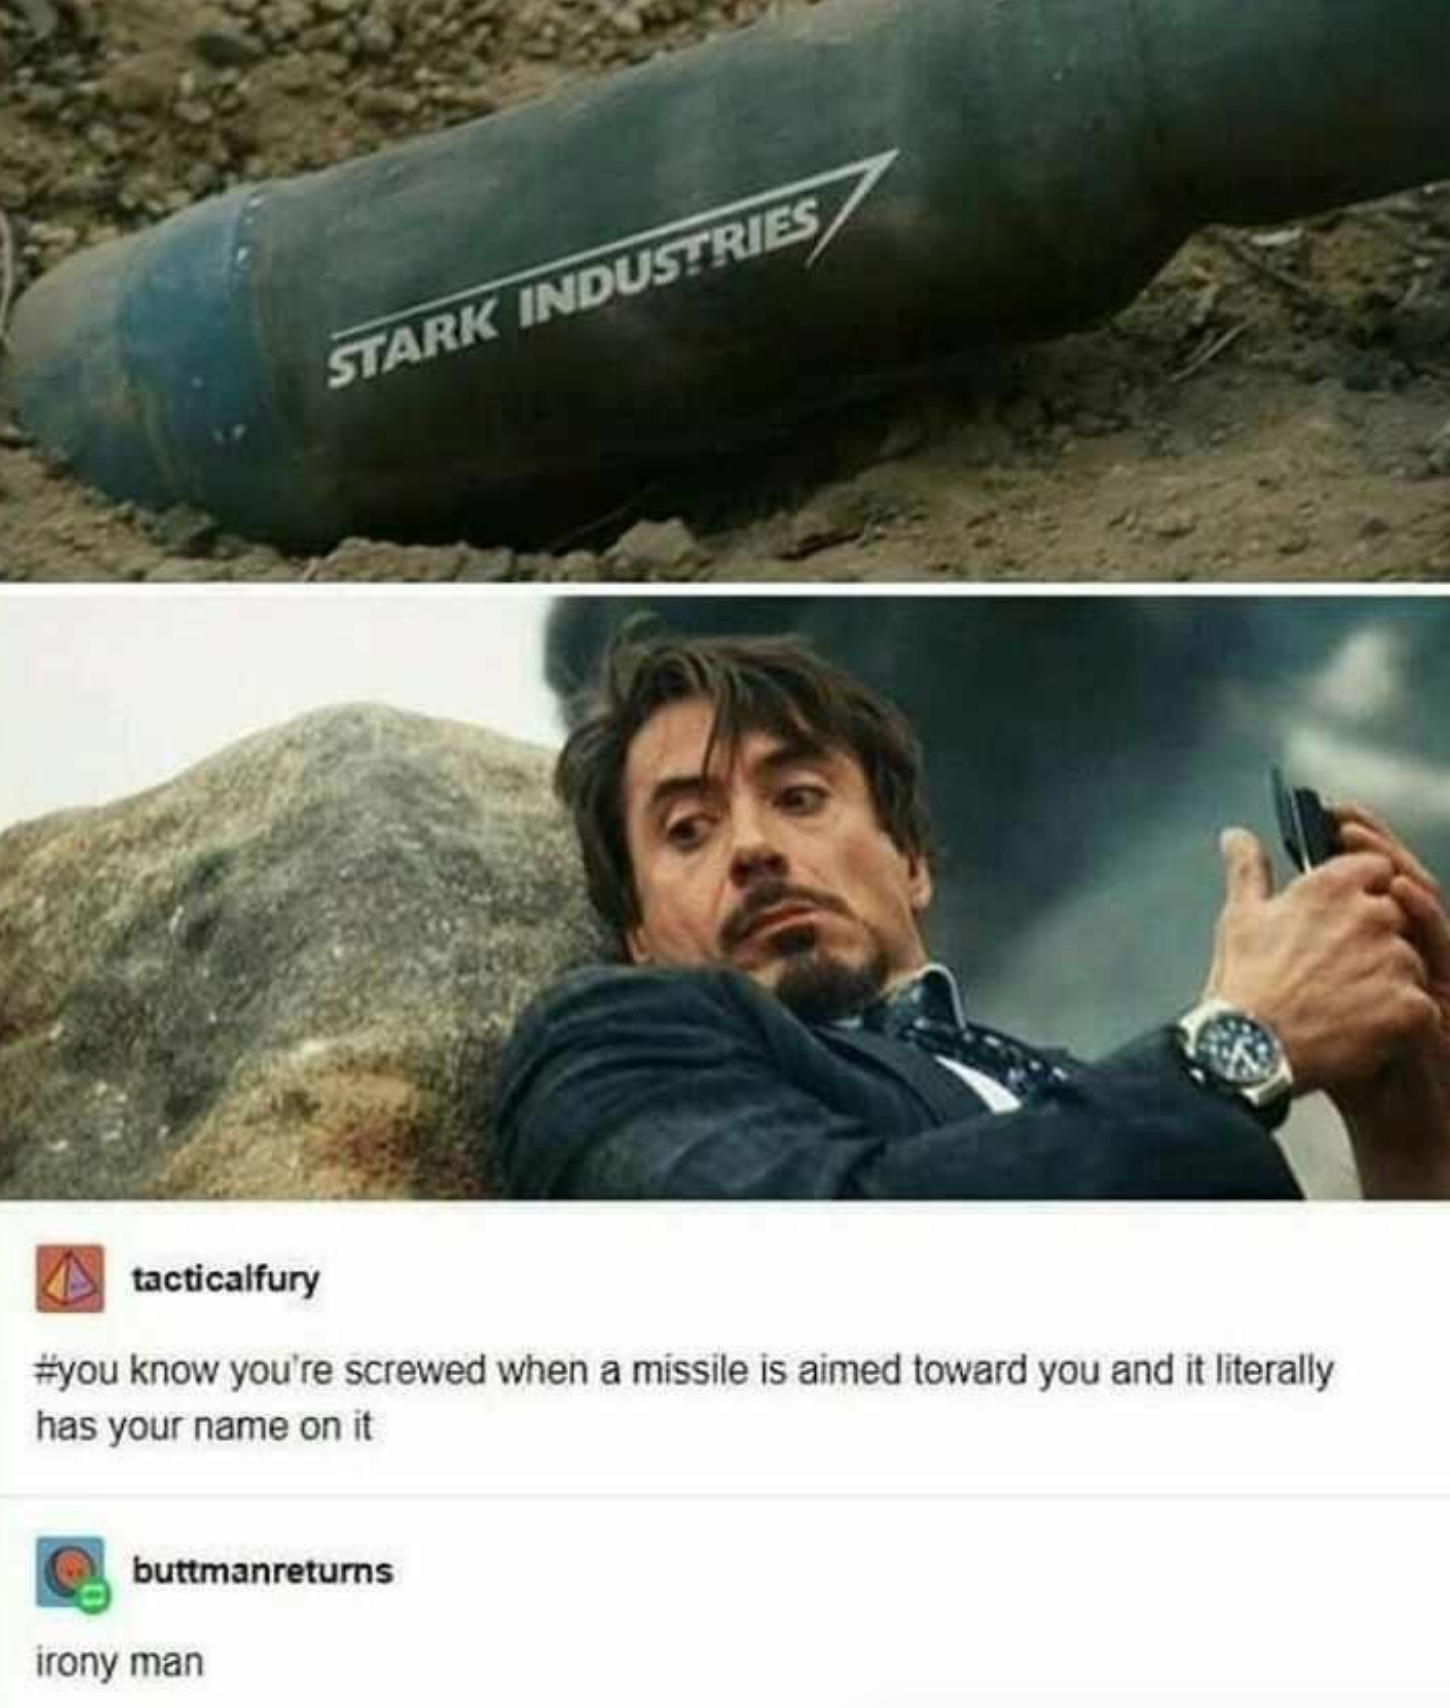 irony man - Stark Industries tacticalfury know you're screwed when a missile is aimed toward you and it literally has your name on it buttmanreturns irony man